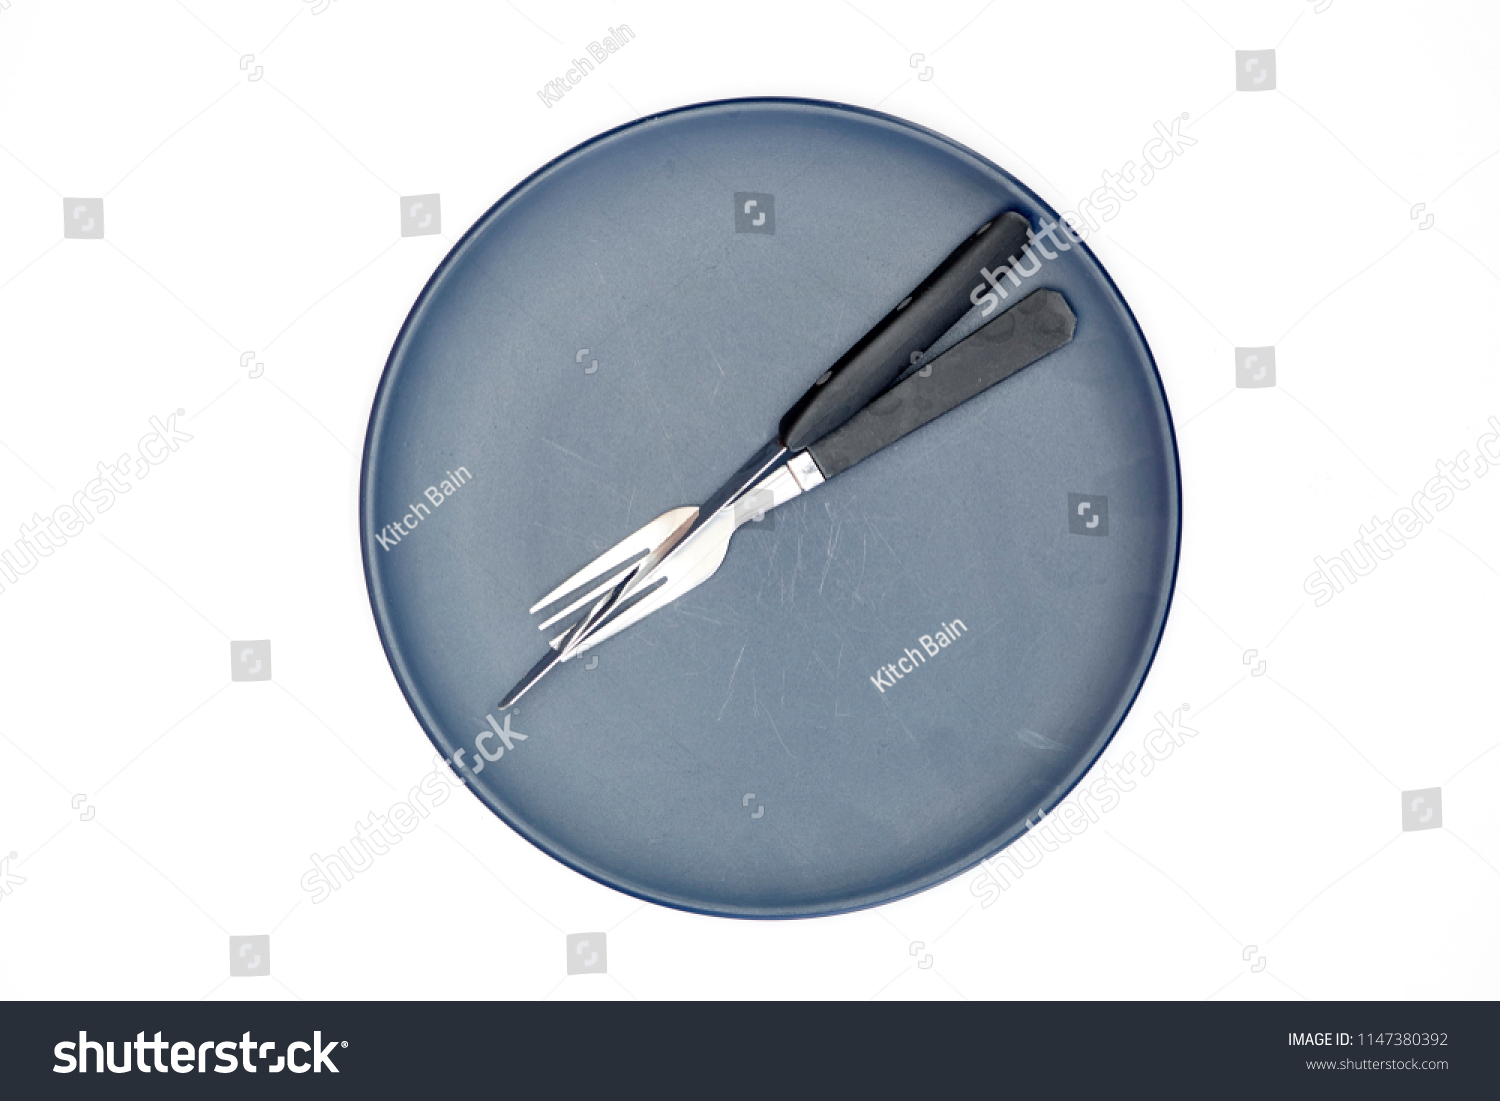 A studio photo of a dinner plate #1147380392